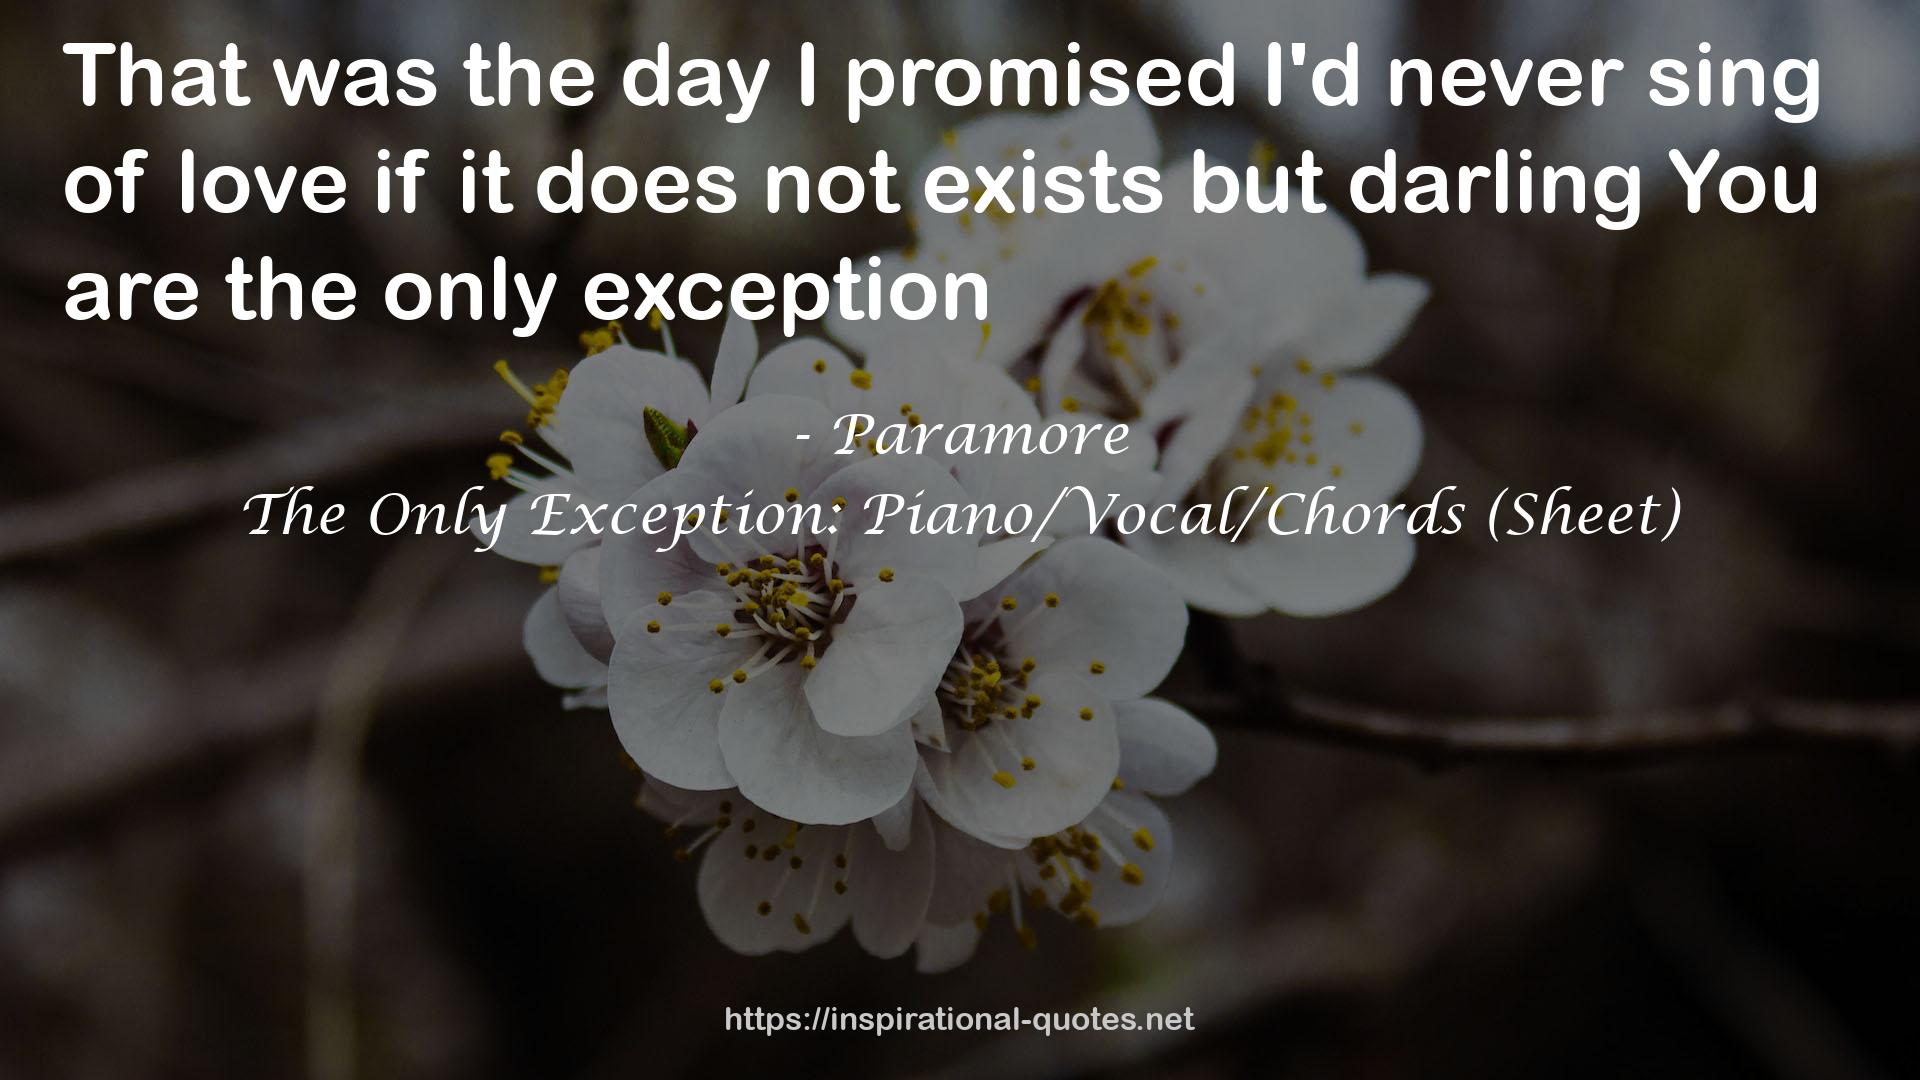 The Only Exception: Piano/Vocal/Chords (Sheet) QUOTES